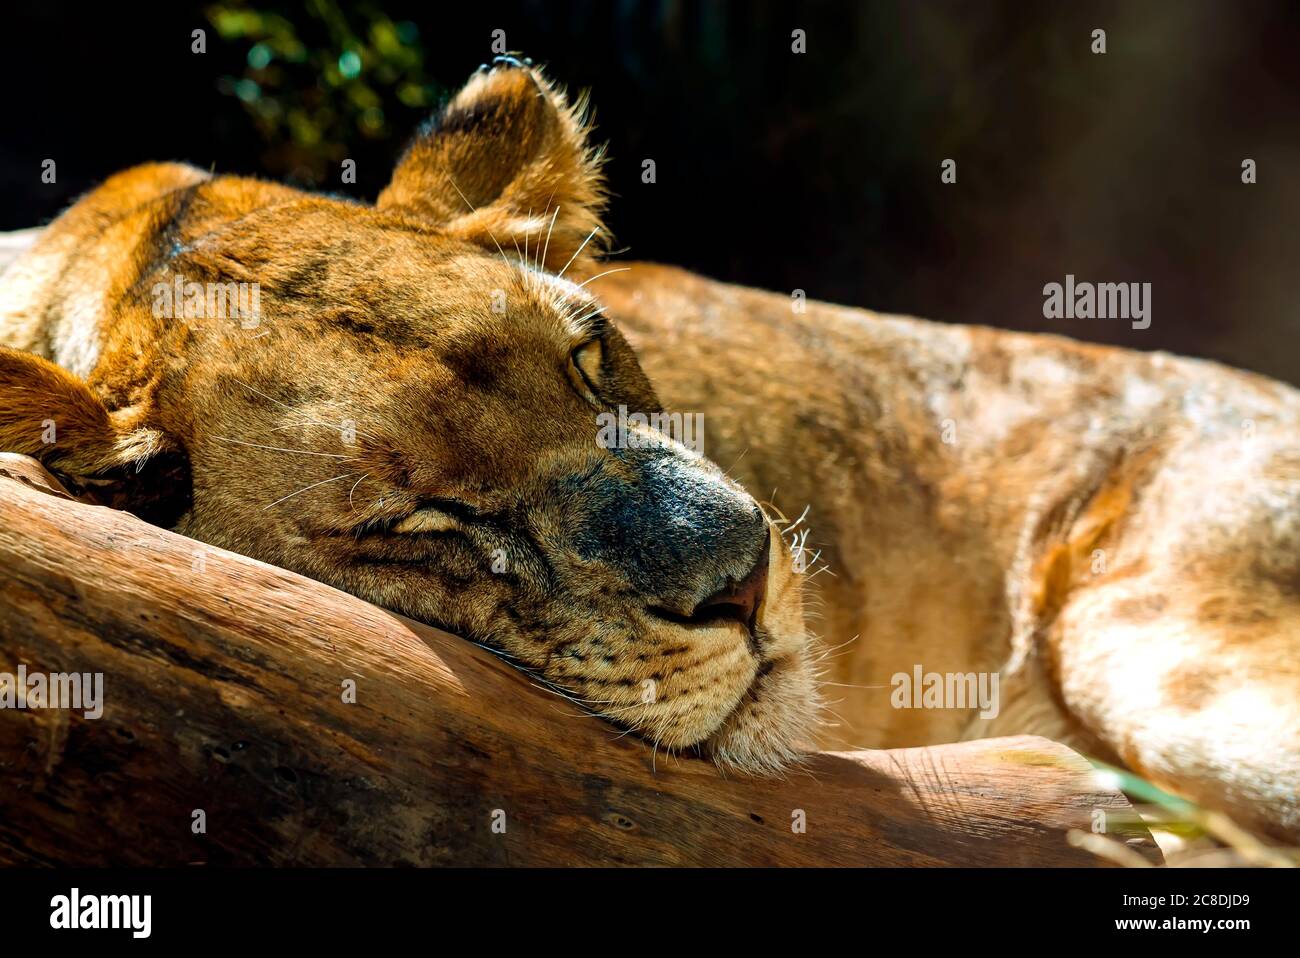 Close up of lioness sleeping. Predator taking a nap. Portrait of a lion resting on the wood Stock Photo